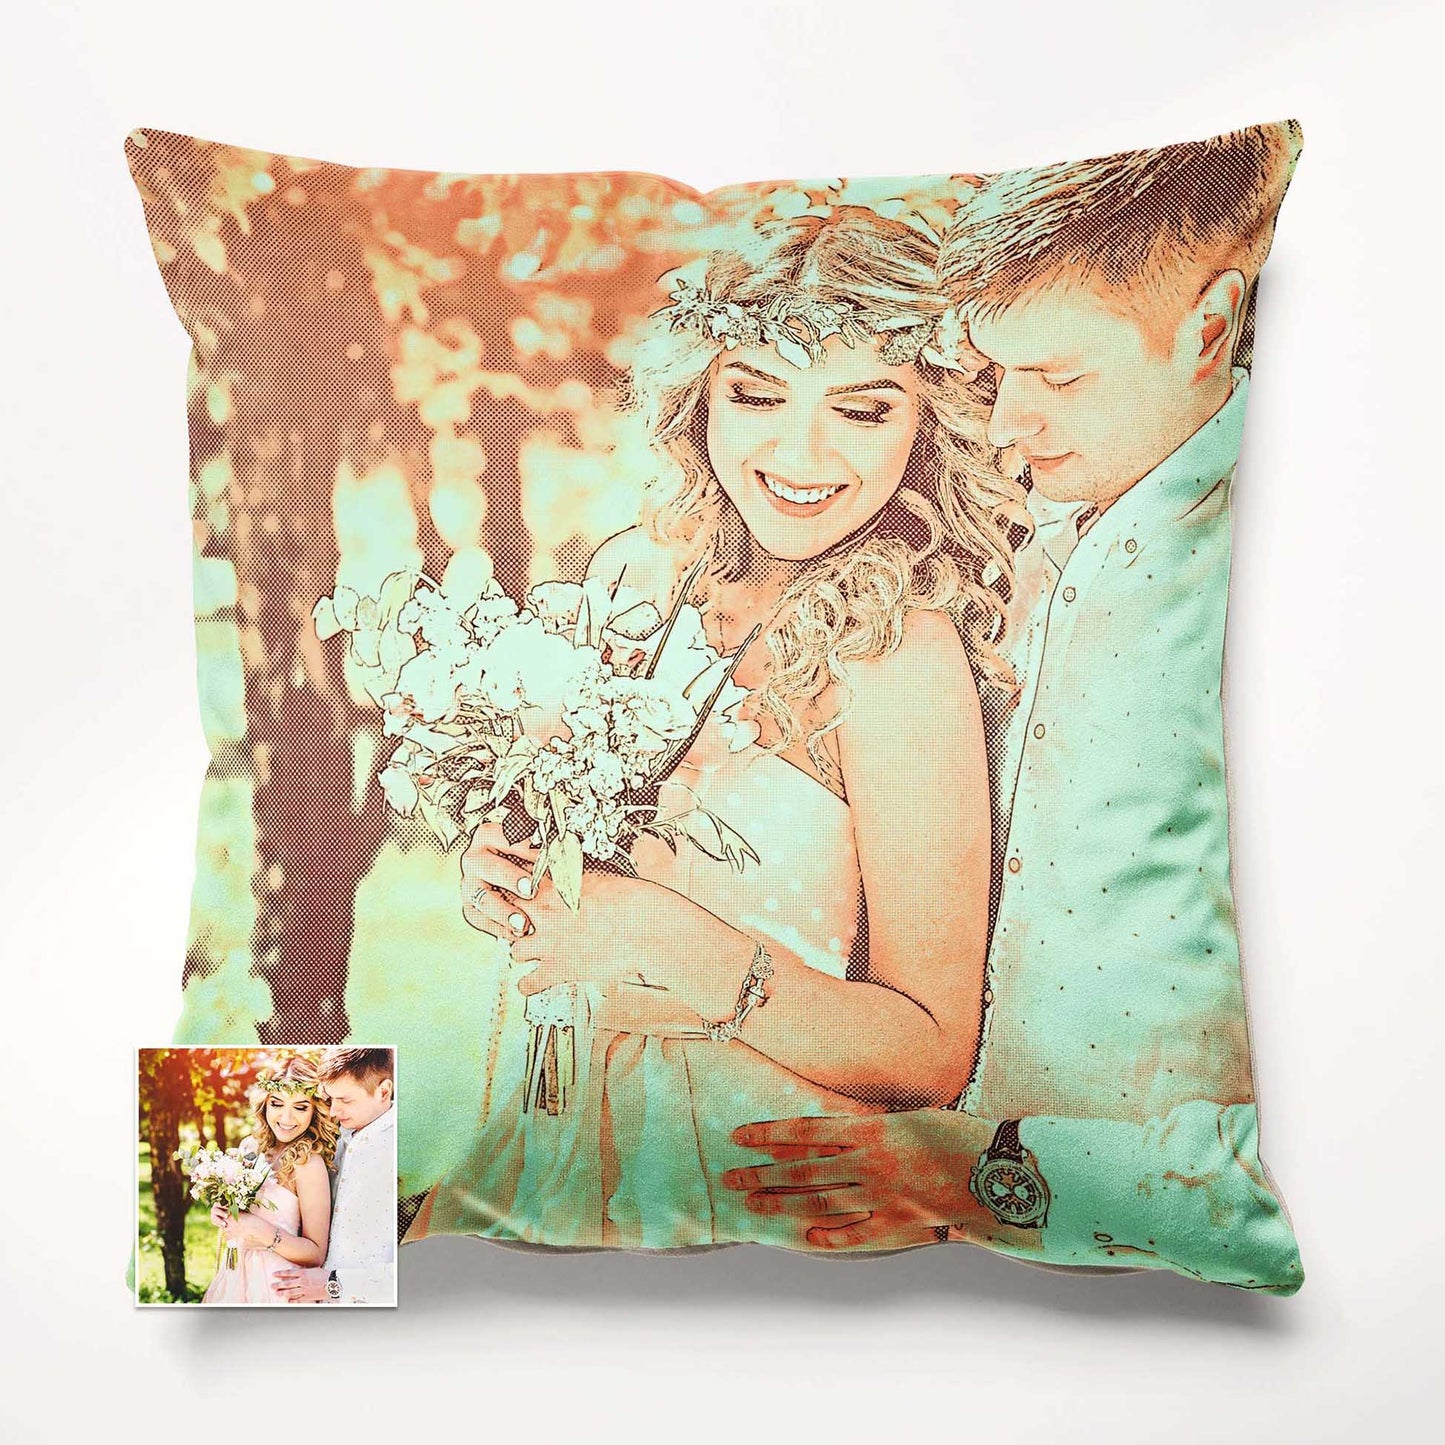 Elevate your home decor with the Personalised Orange and Green Cushion, featuring a custom painting from your favorite photo. This digital art-inspired cushion brings a fresh and cool vibe to any space, adding a trendy and modern touch